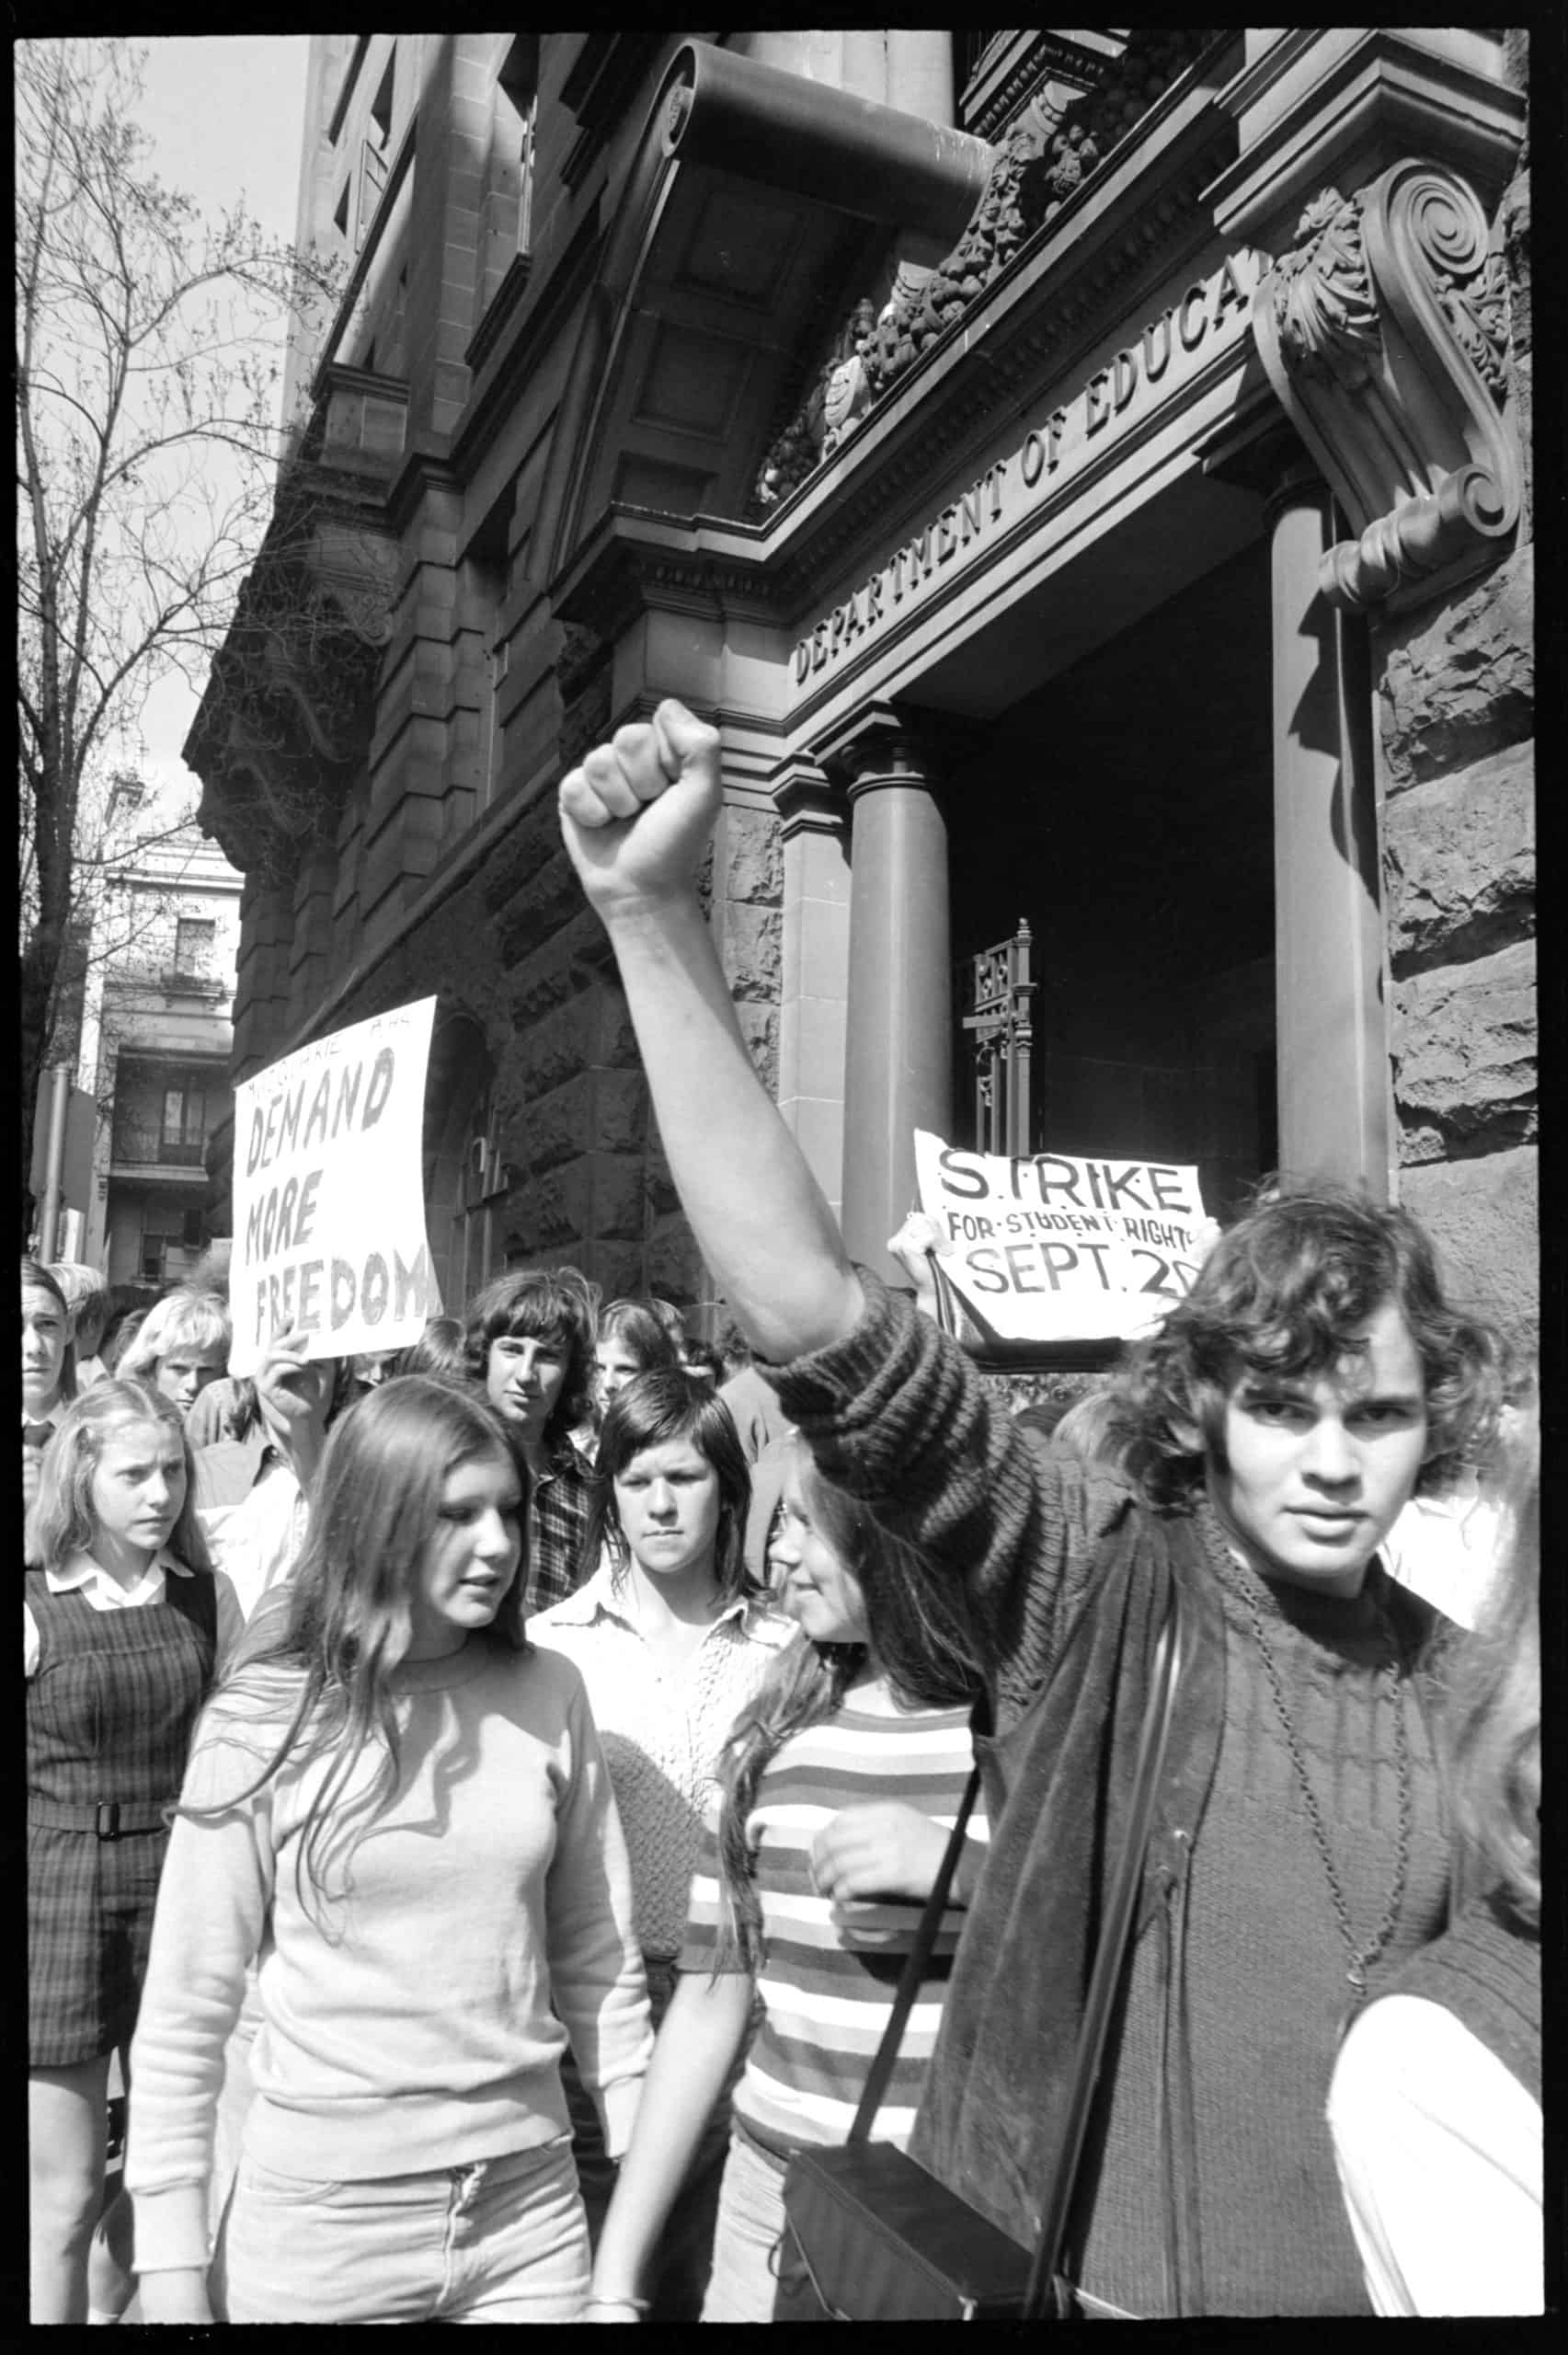 Students walking along street outside an ornate building that reads Department of Education over the doorway. Some students are holding placards. The student at the front has their fist in the air.